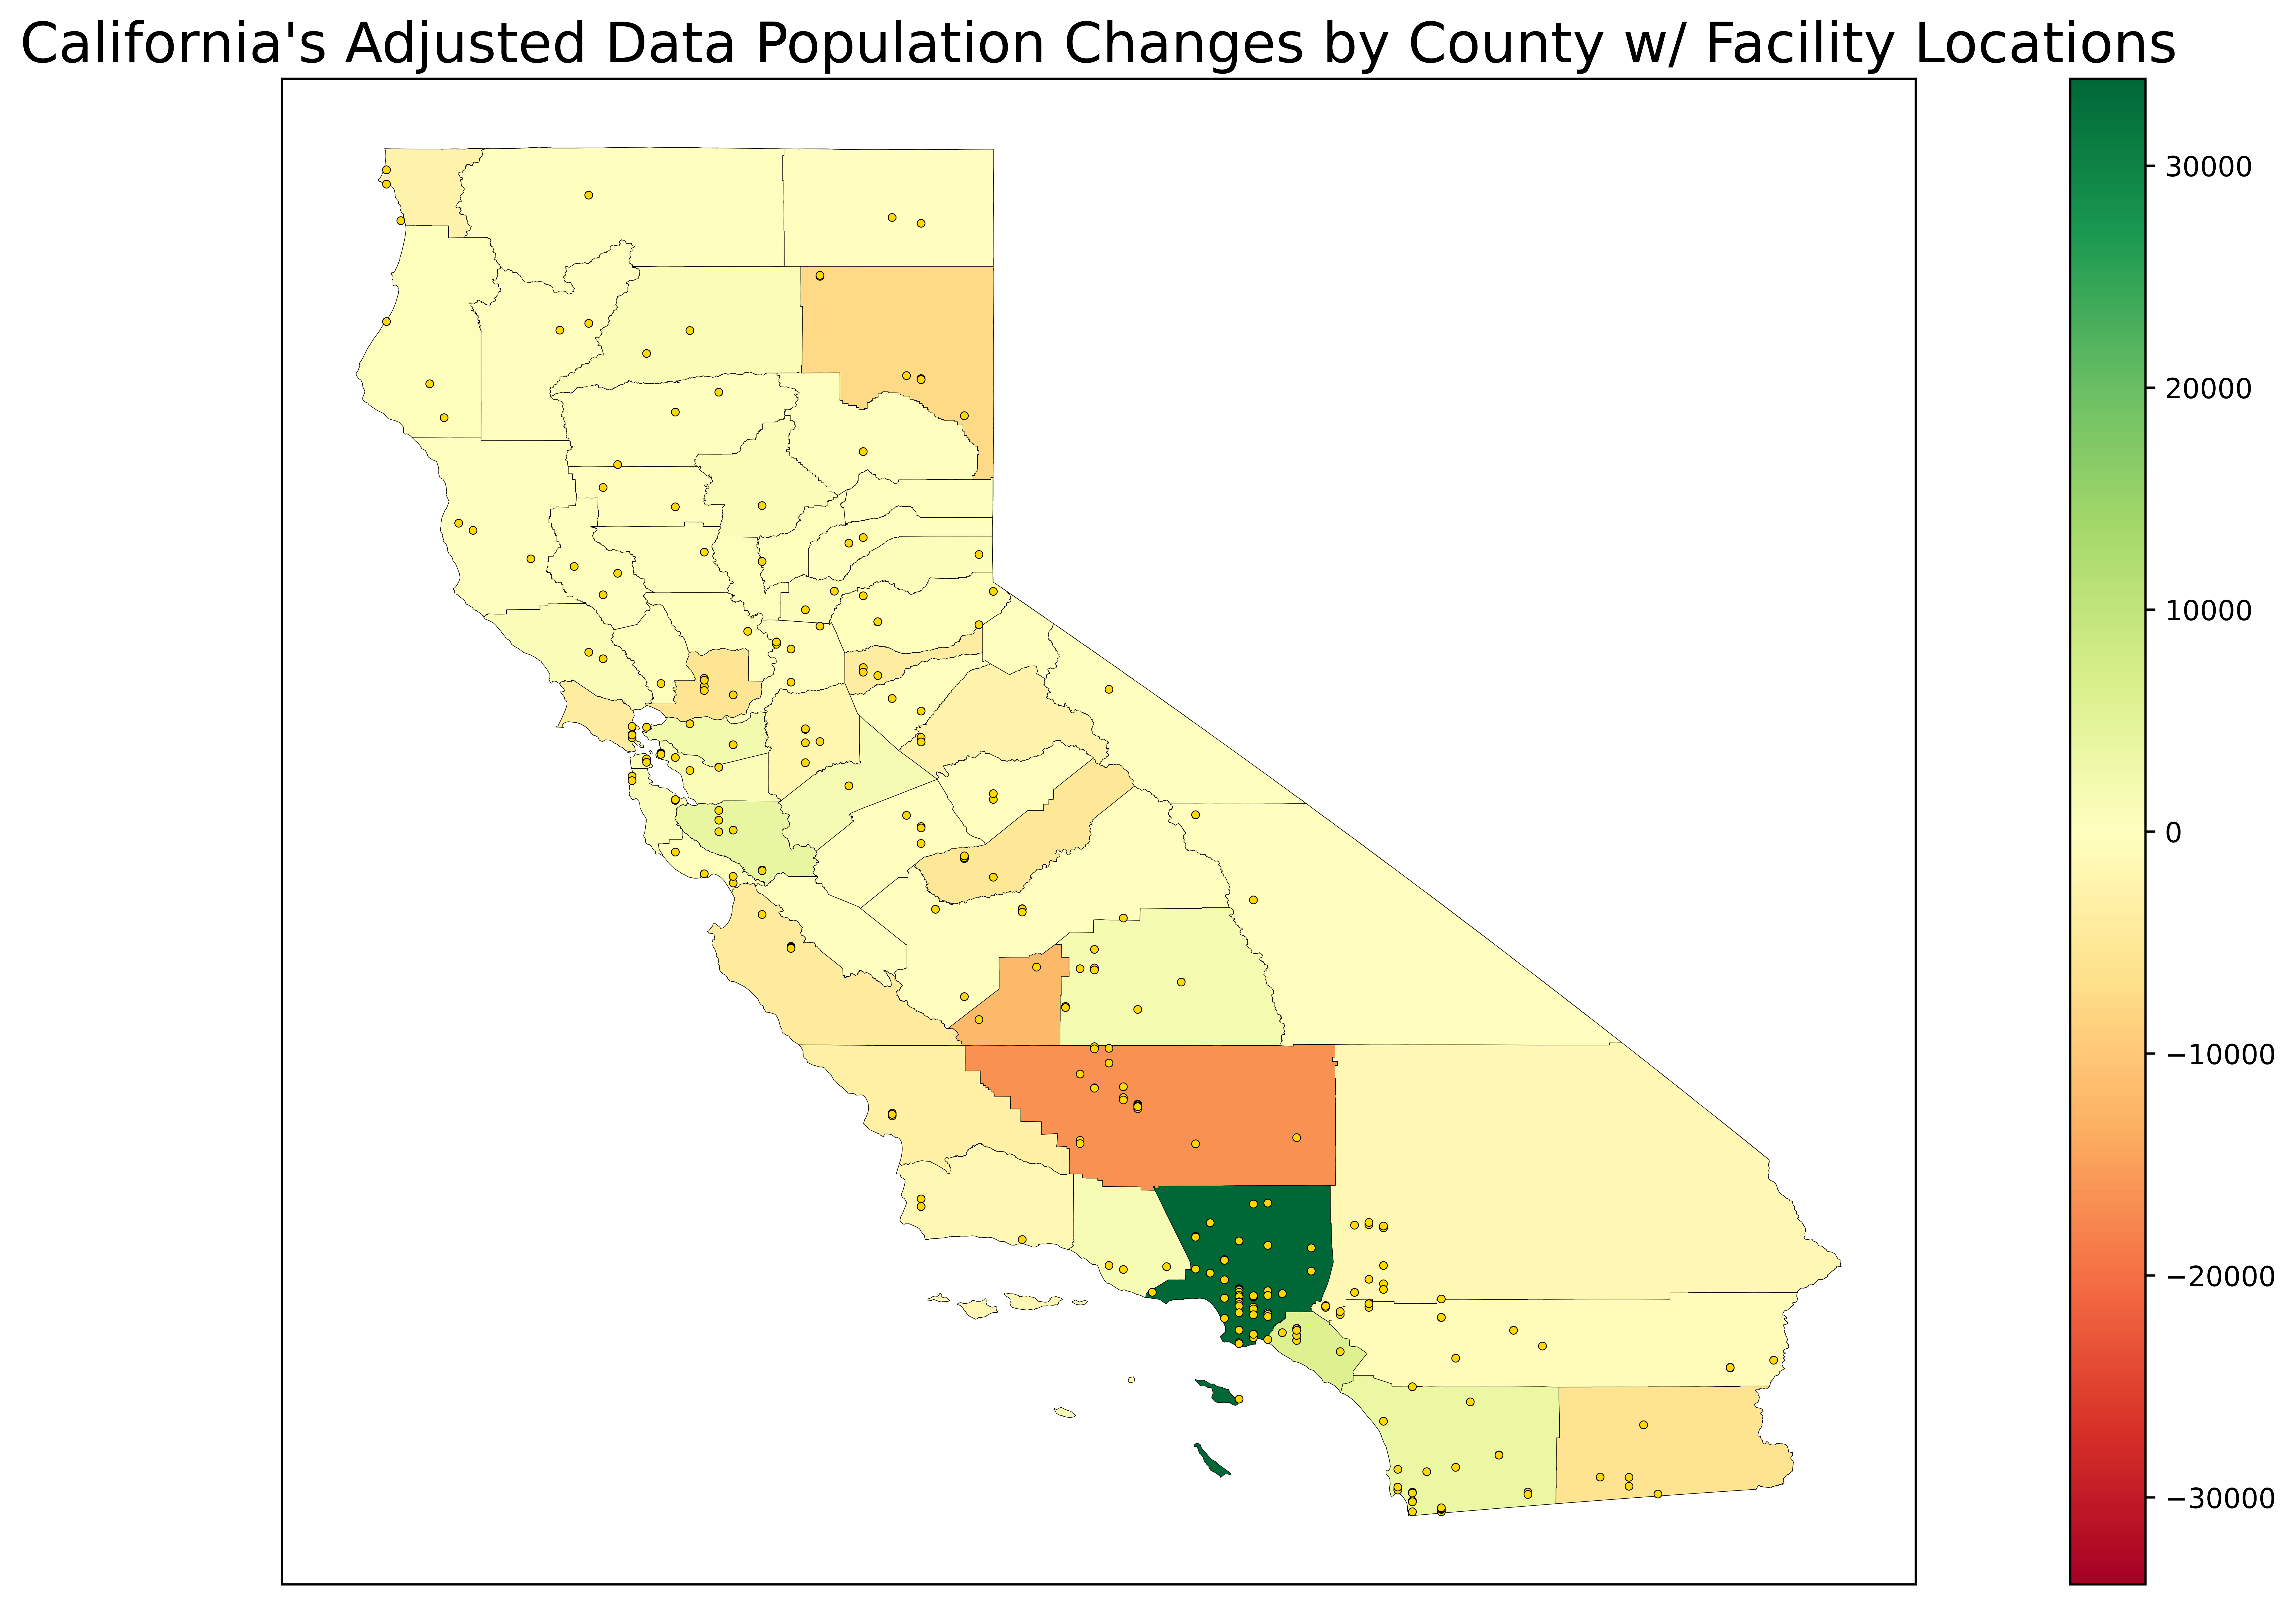 California's Adjusted Data Population Changes by County with Facility Locations